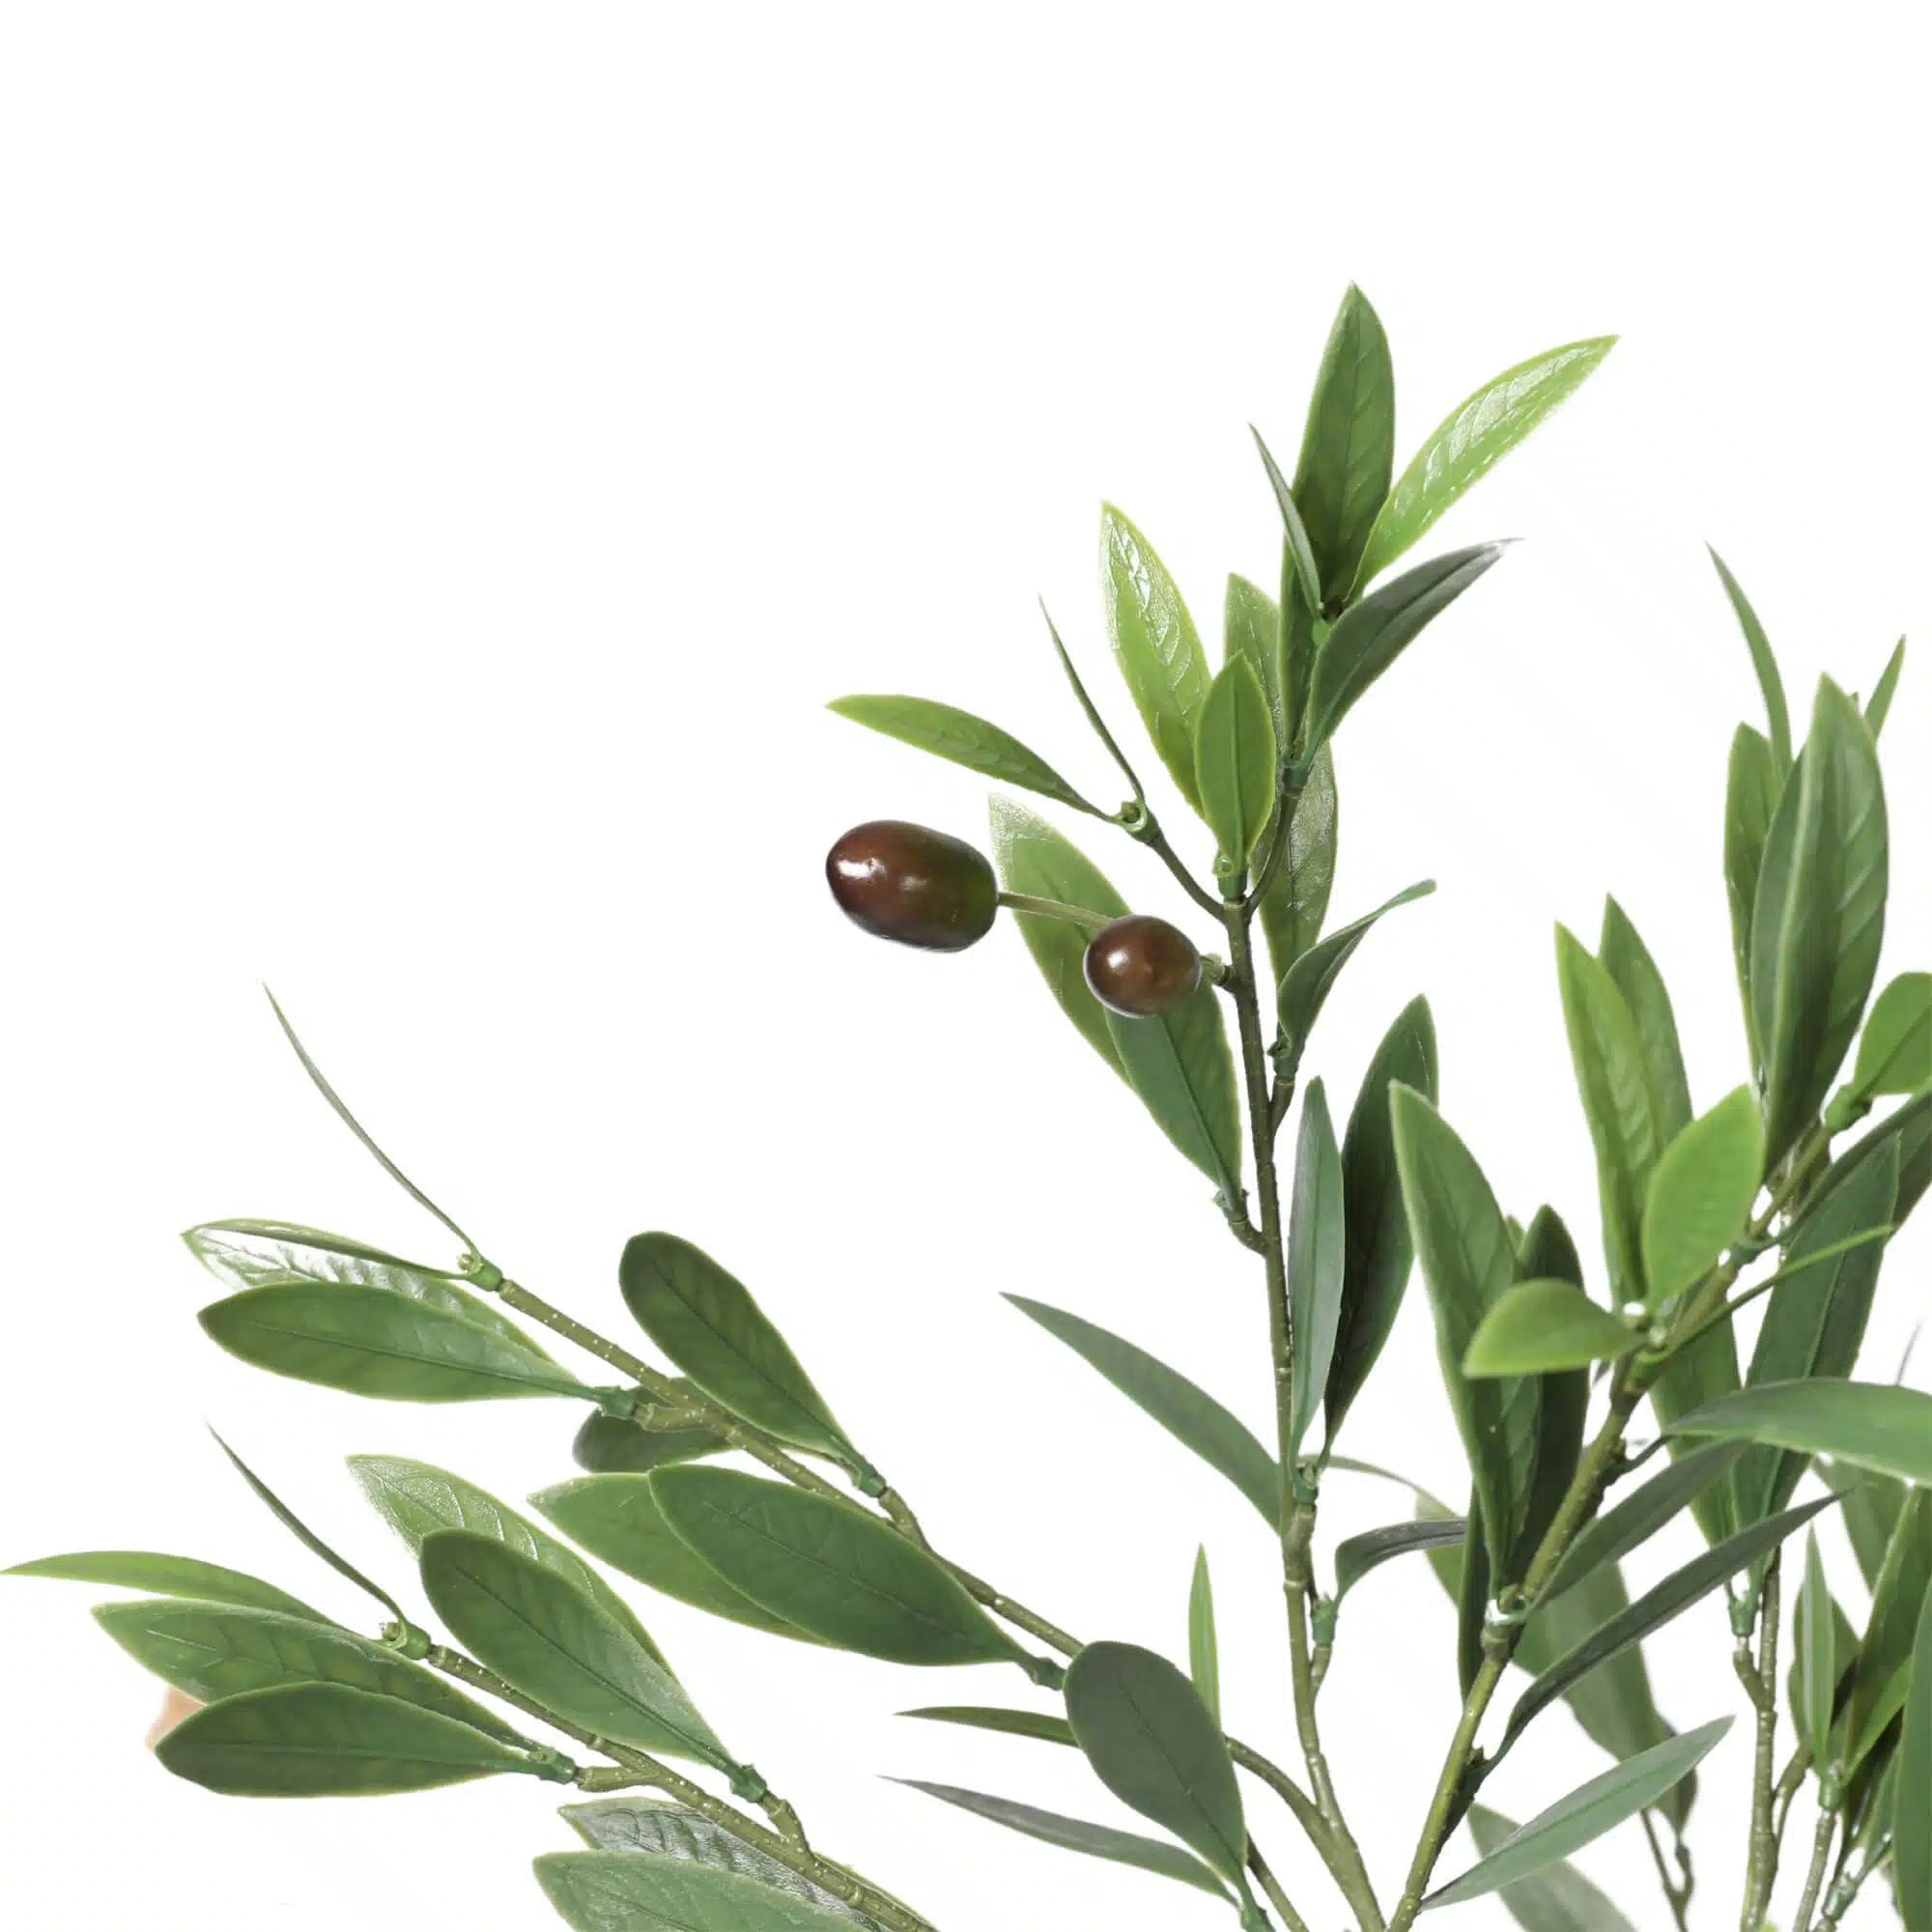 Artificial Potted UV Resistant Nearly Natural Olive Plant 150cm - Designer Vertical Gardens Artificial Trees Artificial Trees for Commercial Properties